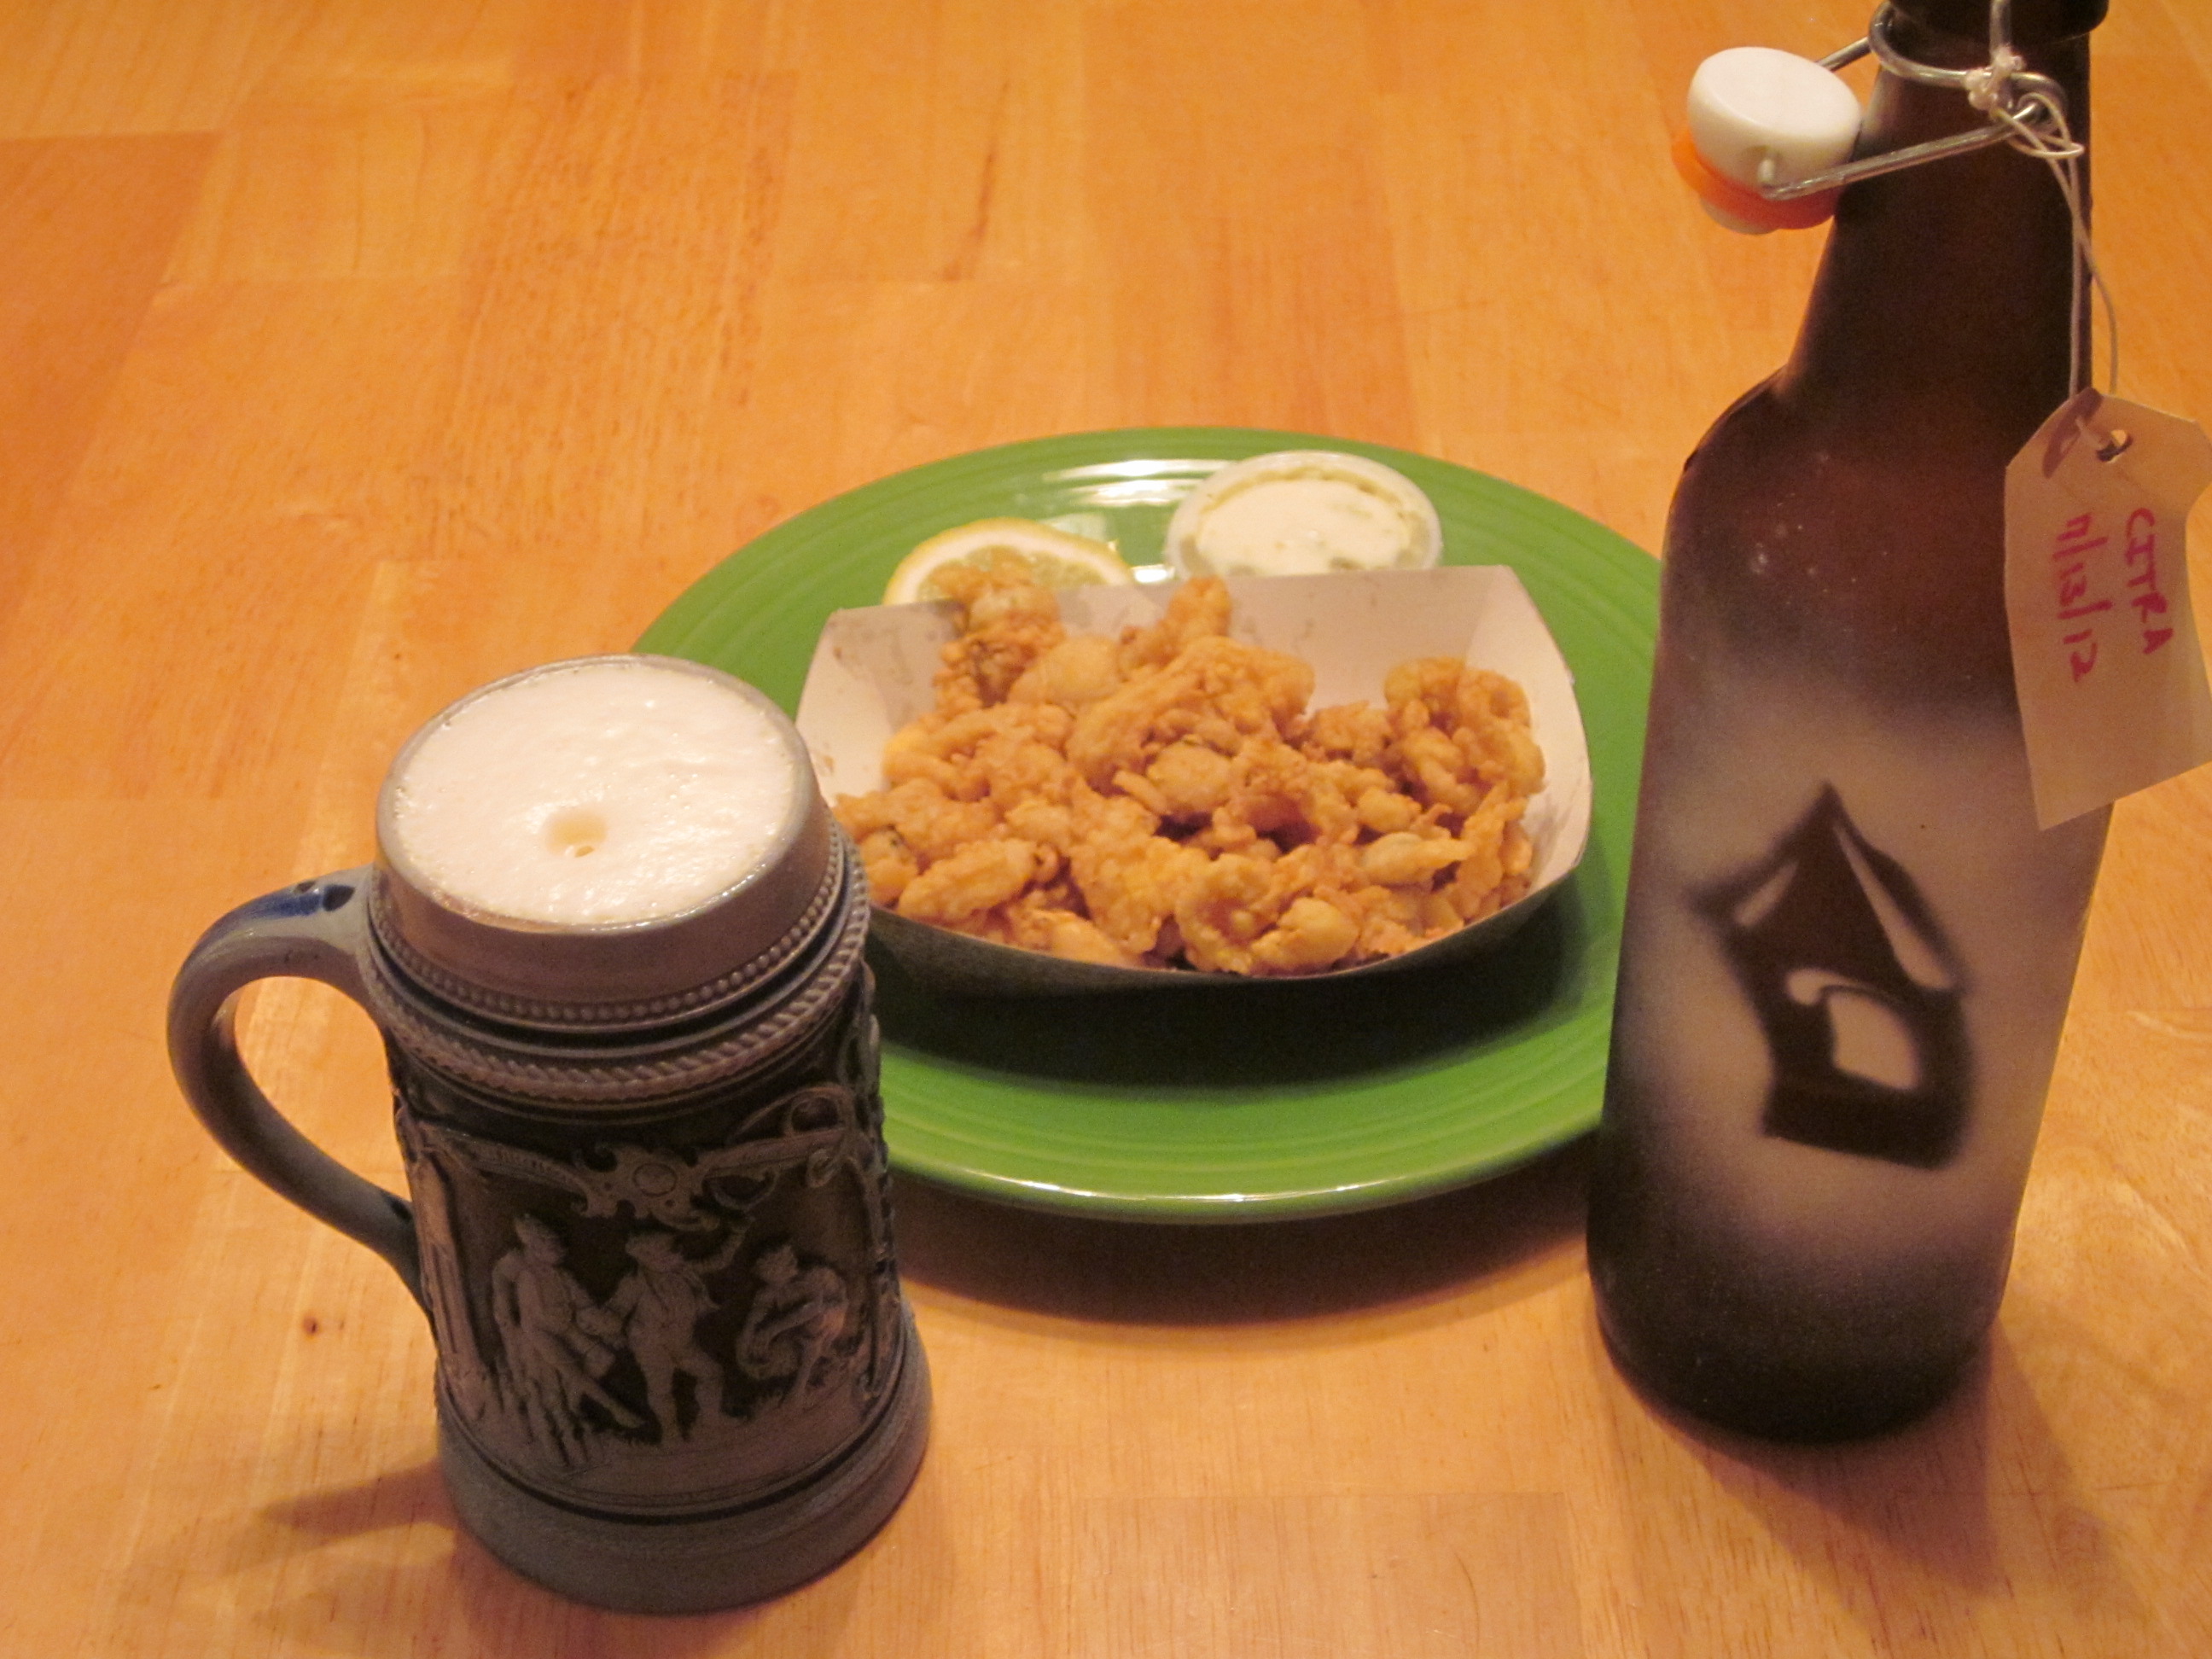 Treehouse Citra IPA with fried clams